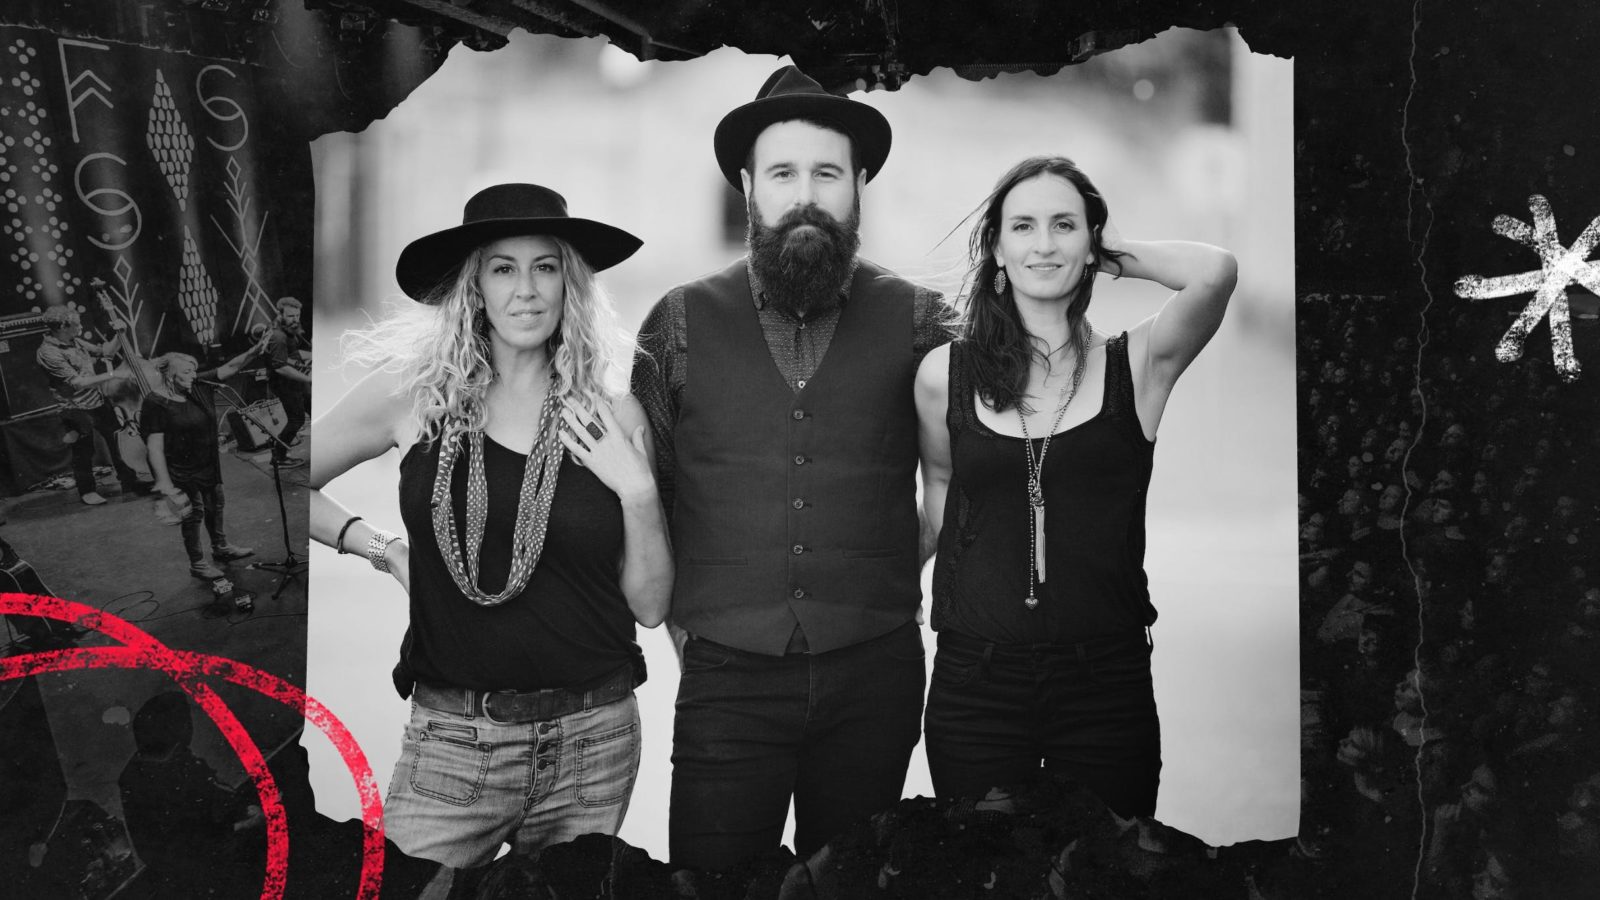 Promotional image of The Waifs